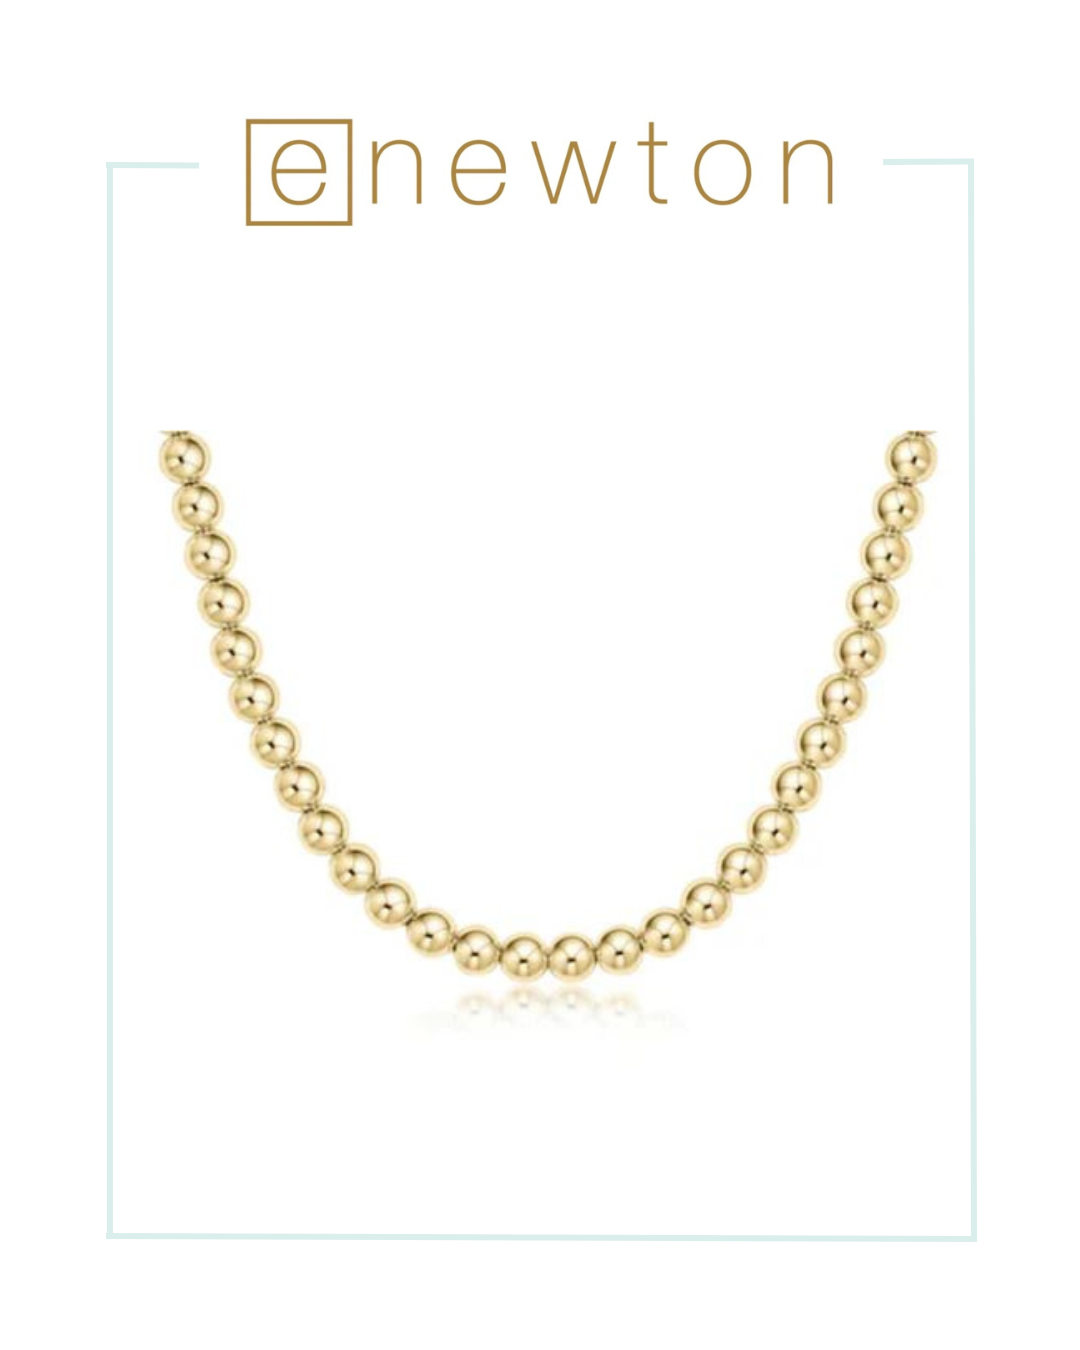 E Newton 15" Choker Classic Gold - 6mm-Necklaces-ENEWTON-The Village Shoppe, Women’s Fashion Boutique, Shop Online and In Store - Located in Muscle Shoals, AL.